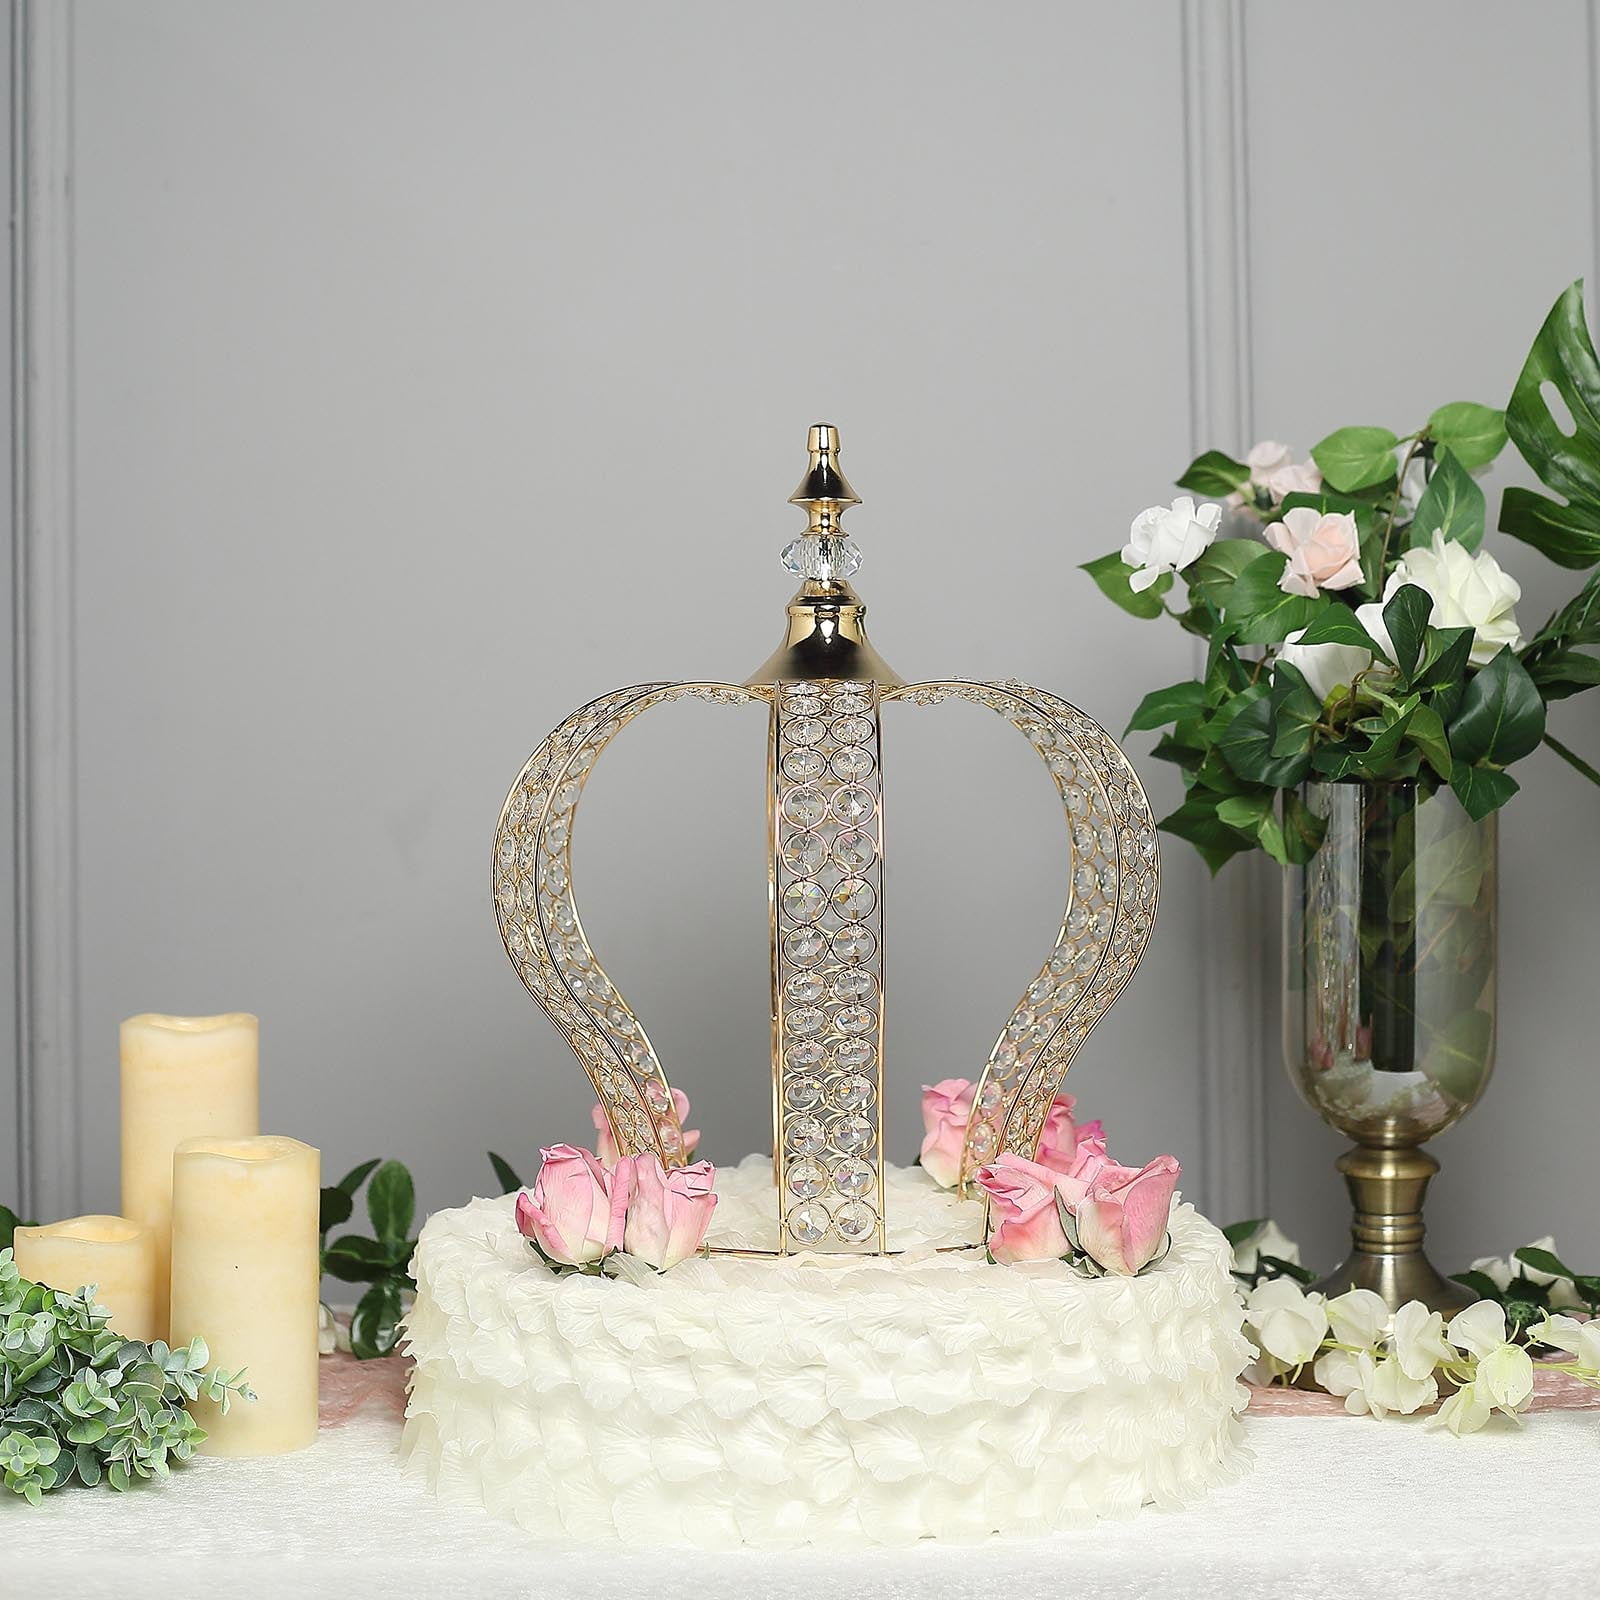  SOIMISS Crown Cake Topper Fairy Butterfly Crystal